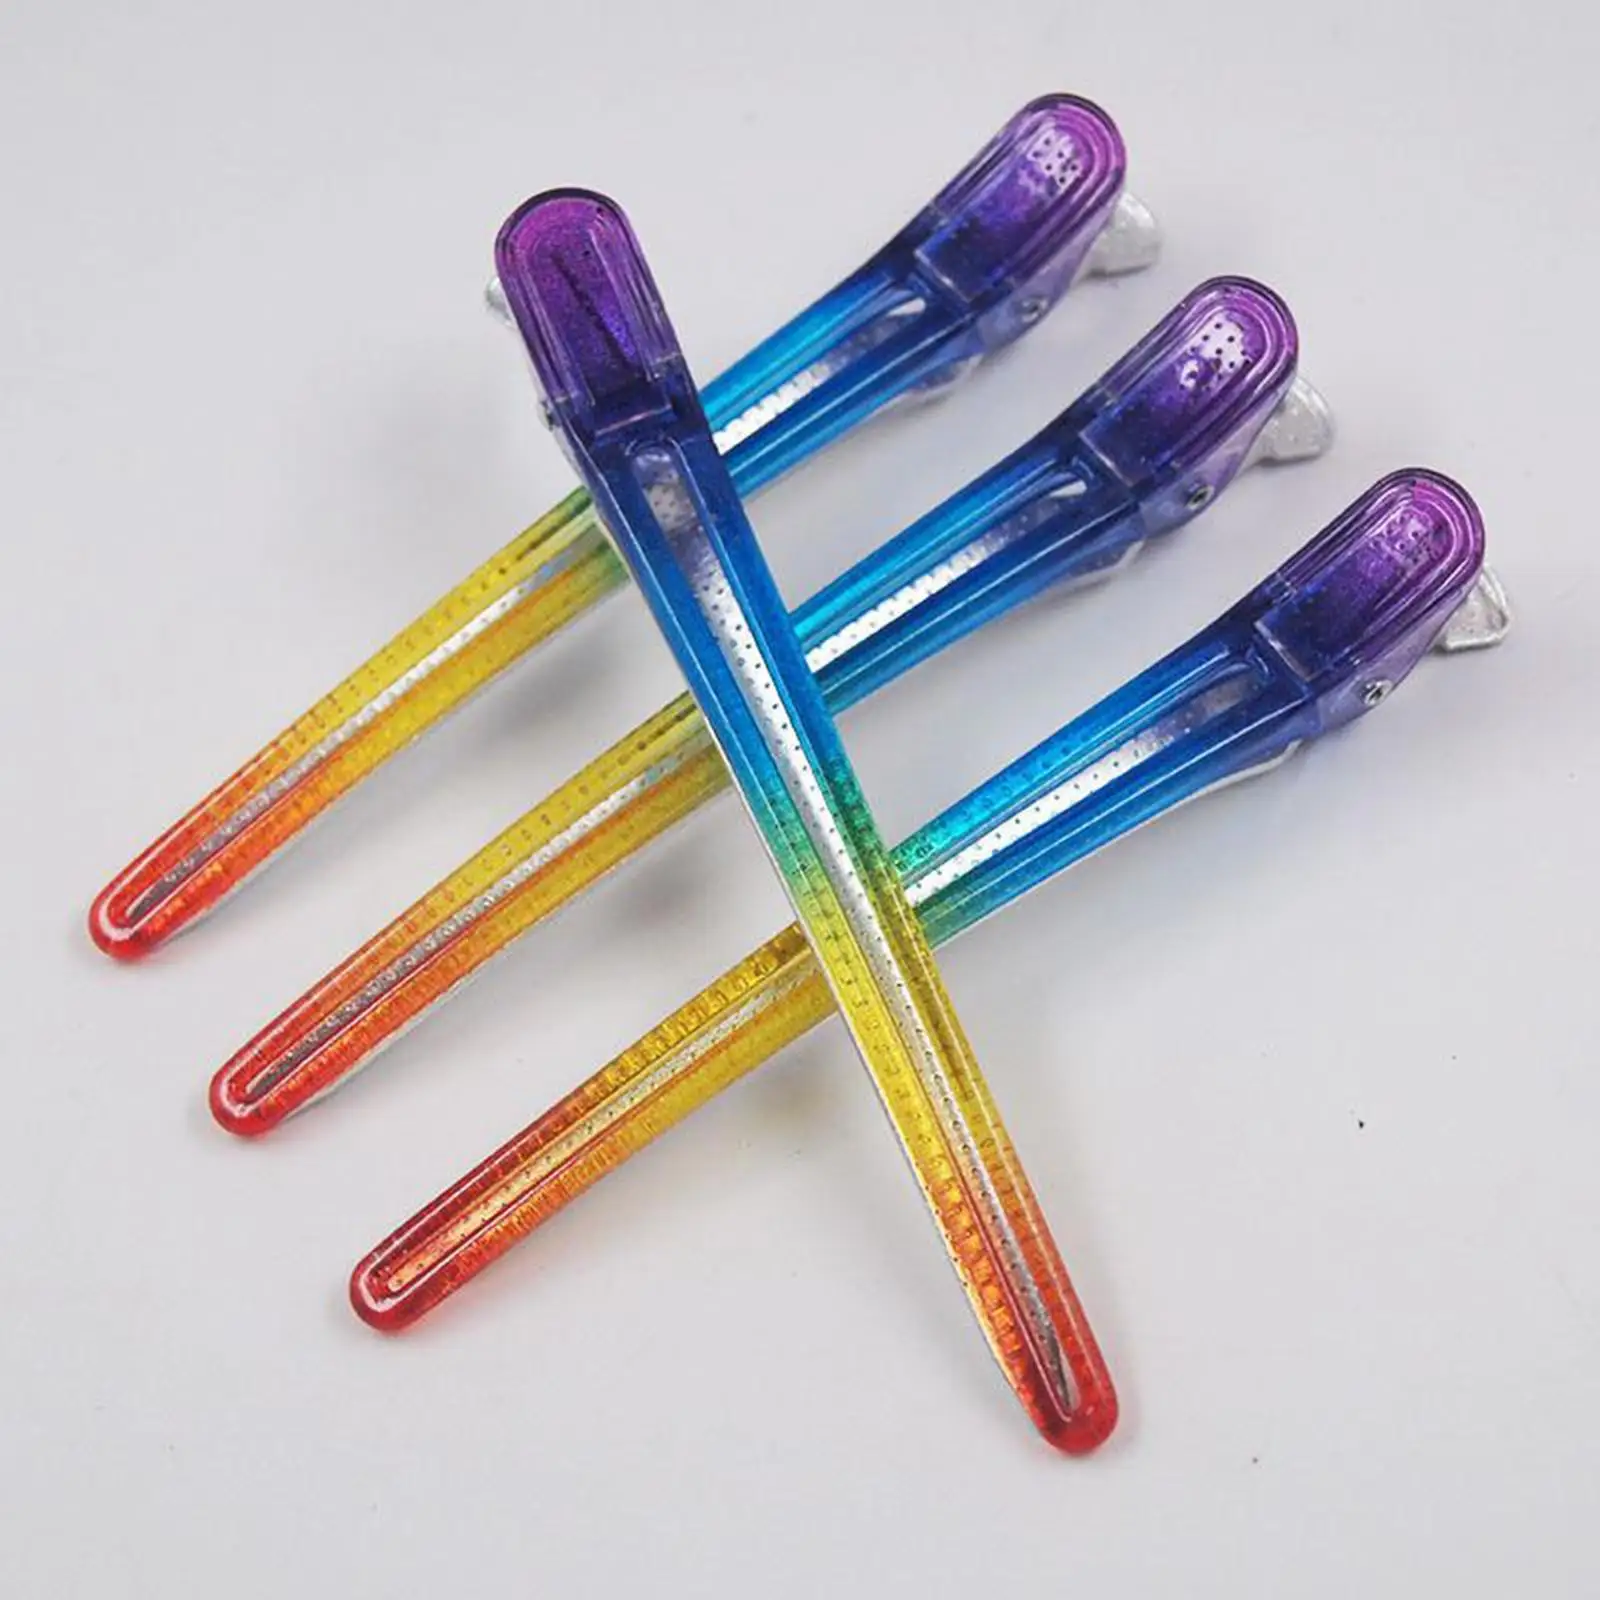 4pcs salon duck bill alligator clips partition coloring cutting hair clips